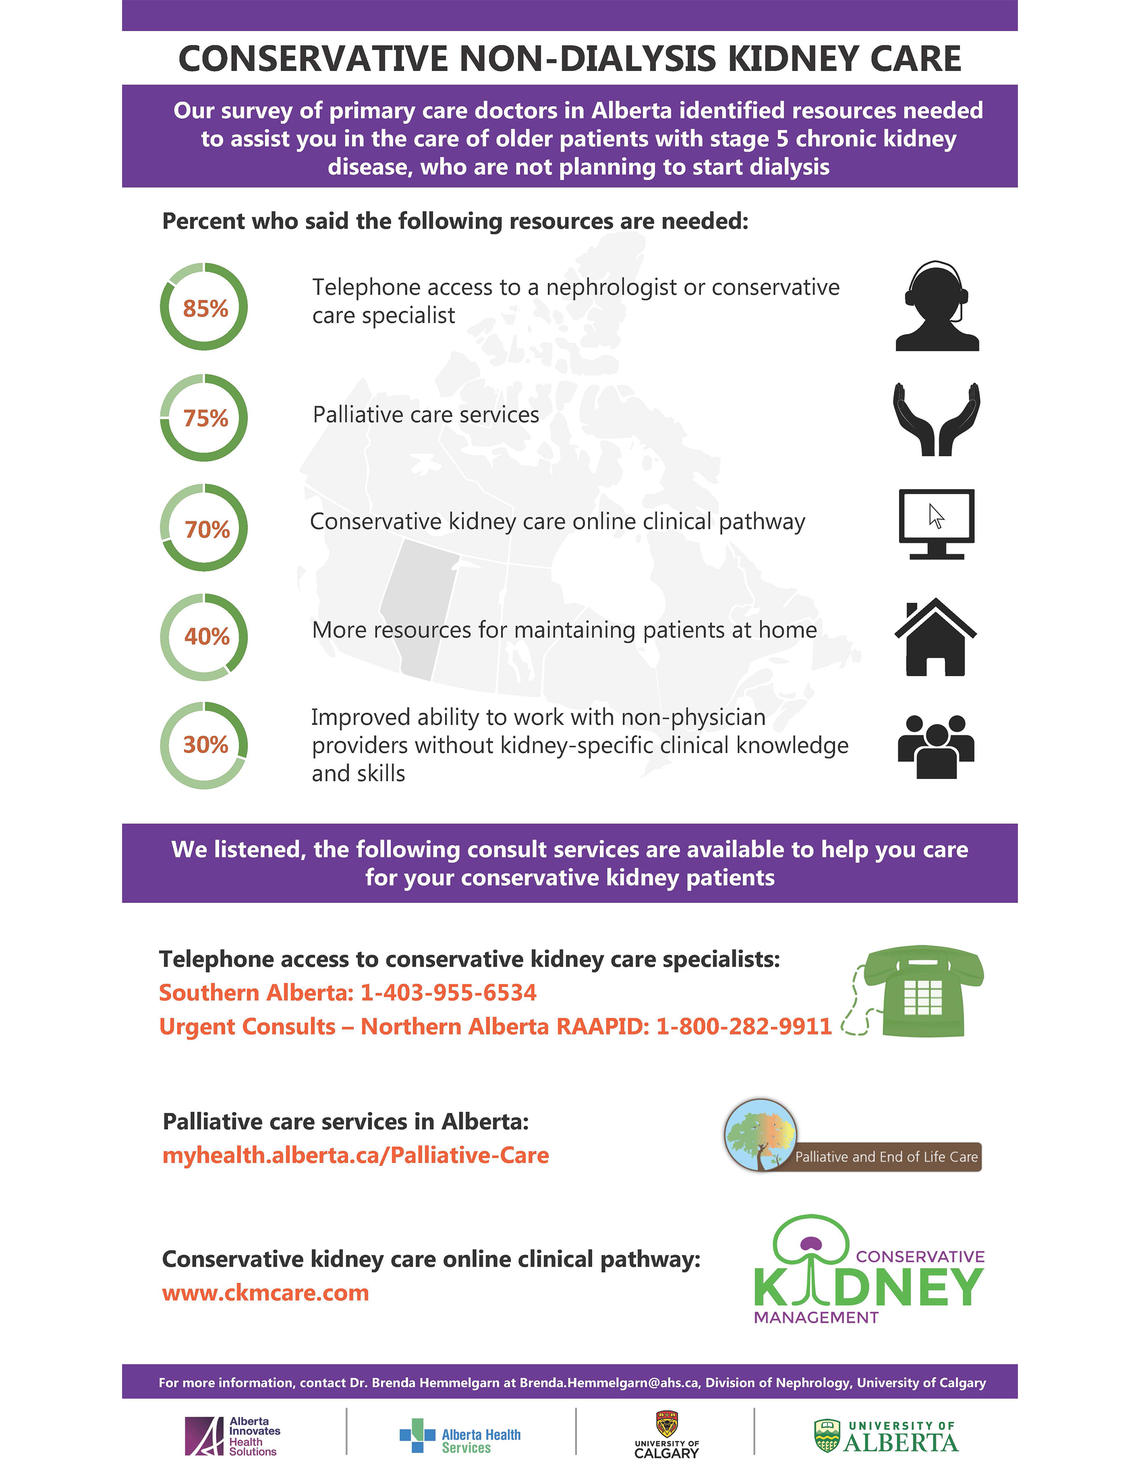 Infographic showing options for non dialysis conservative care